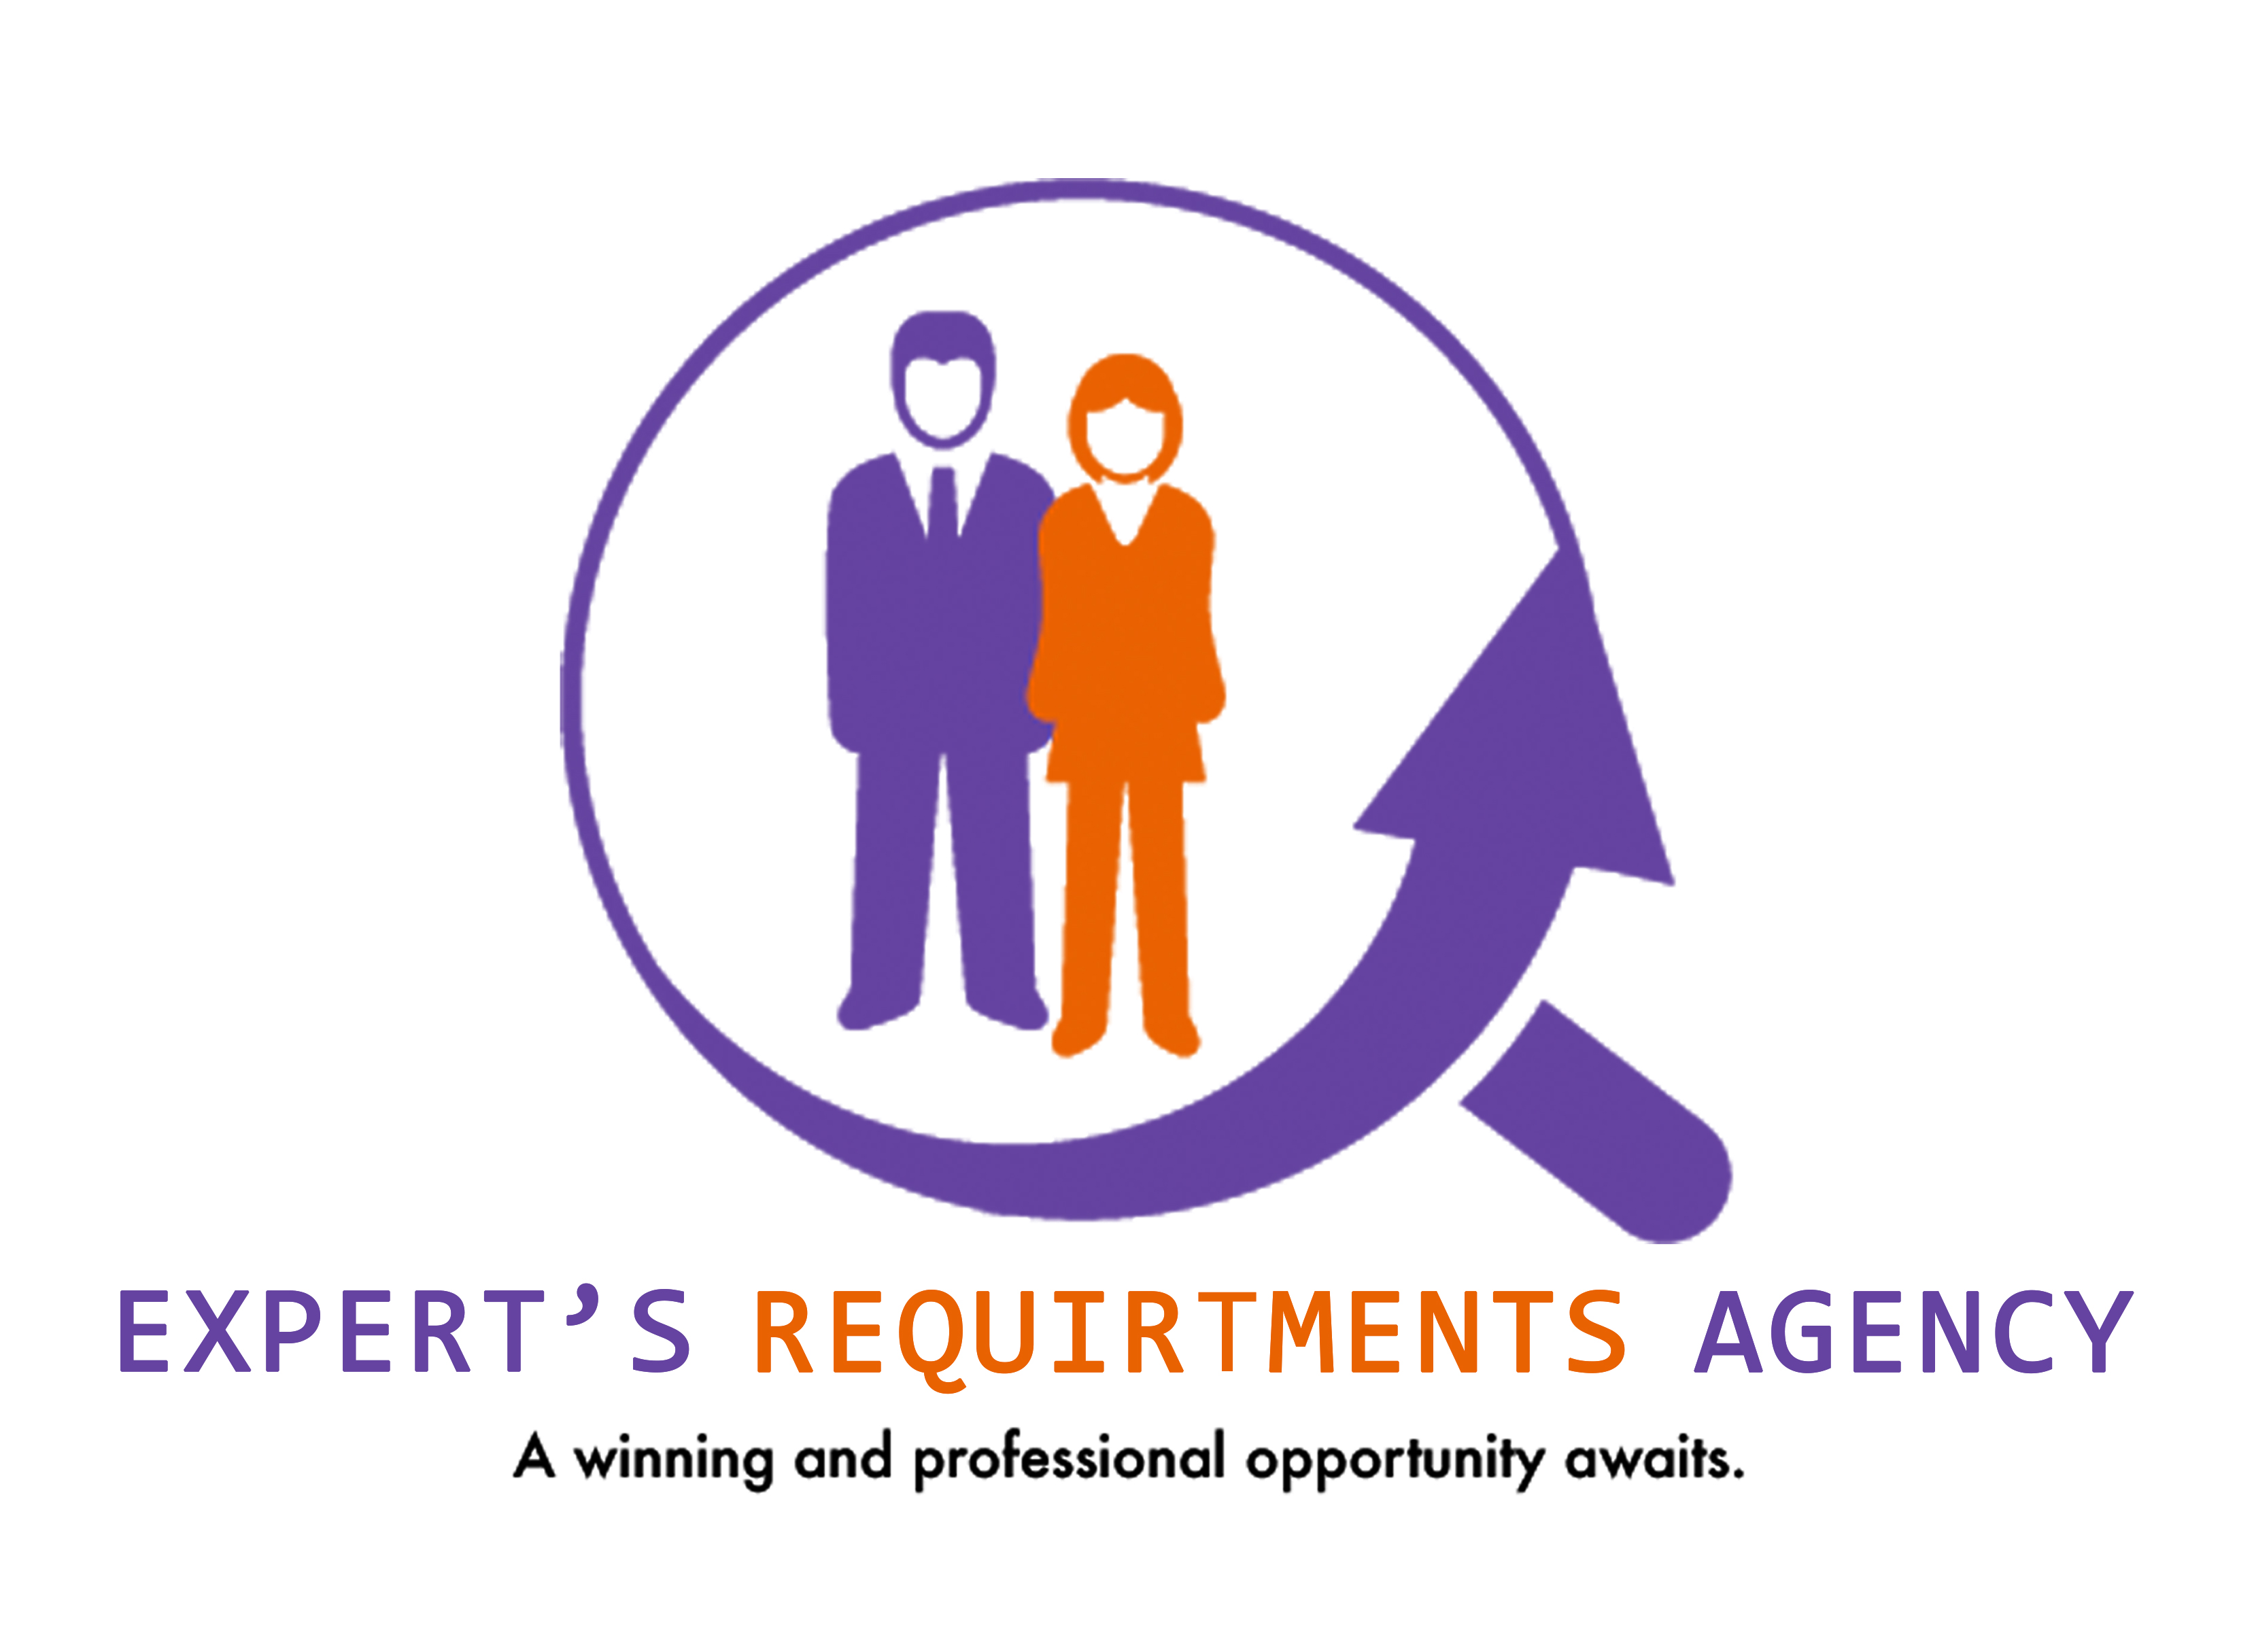 https://www.pakpositions.com/company/experts-recruitment-agency